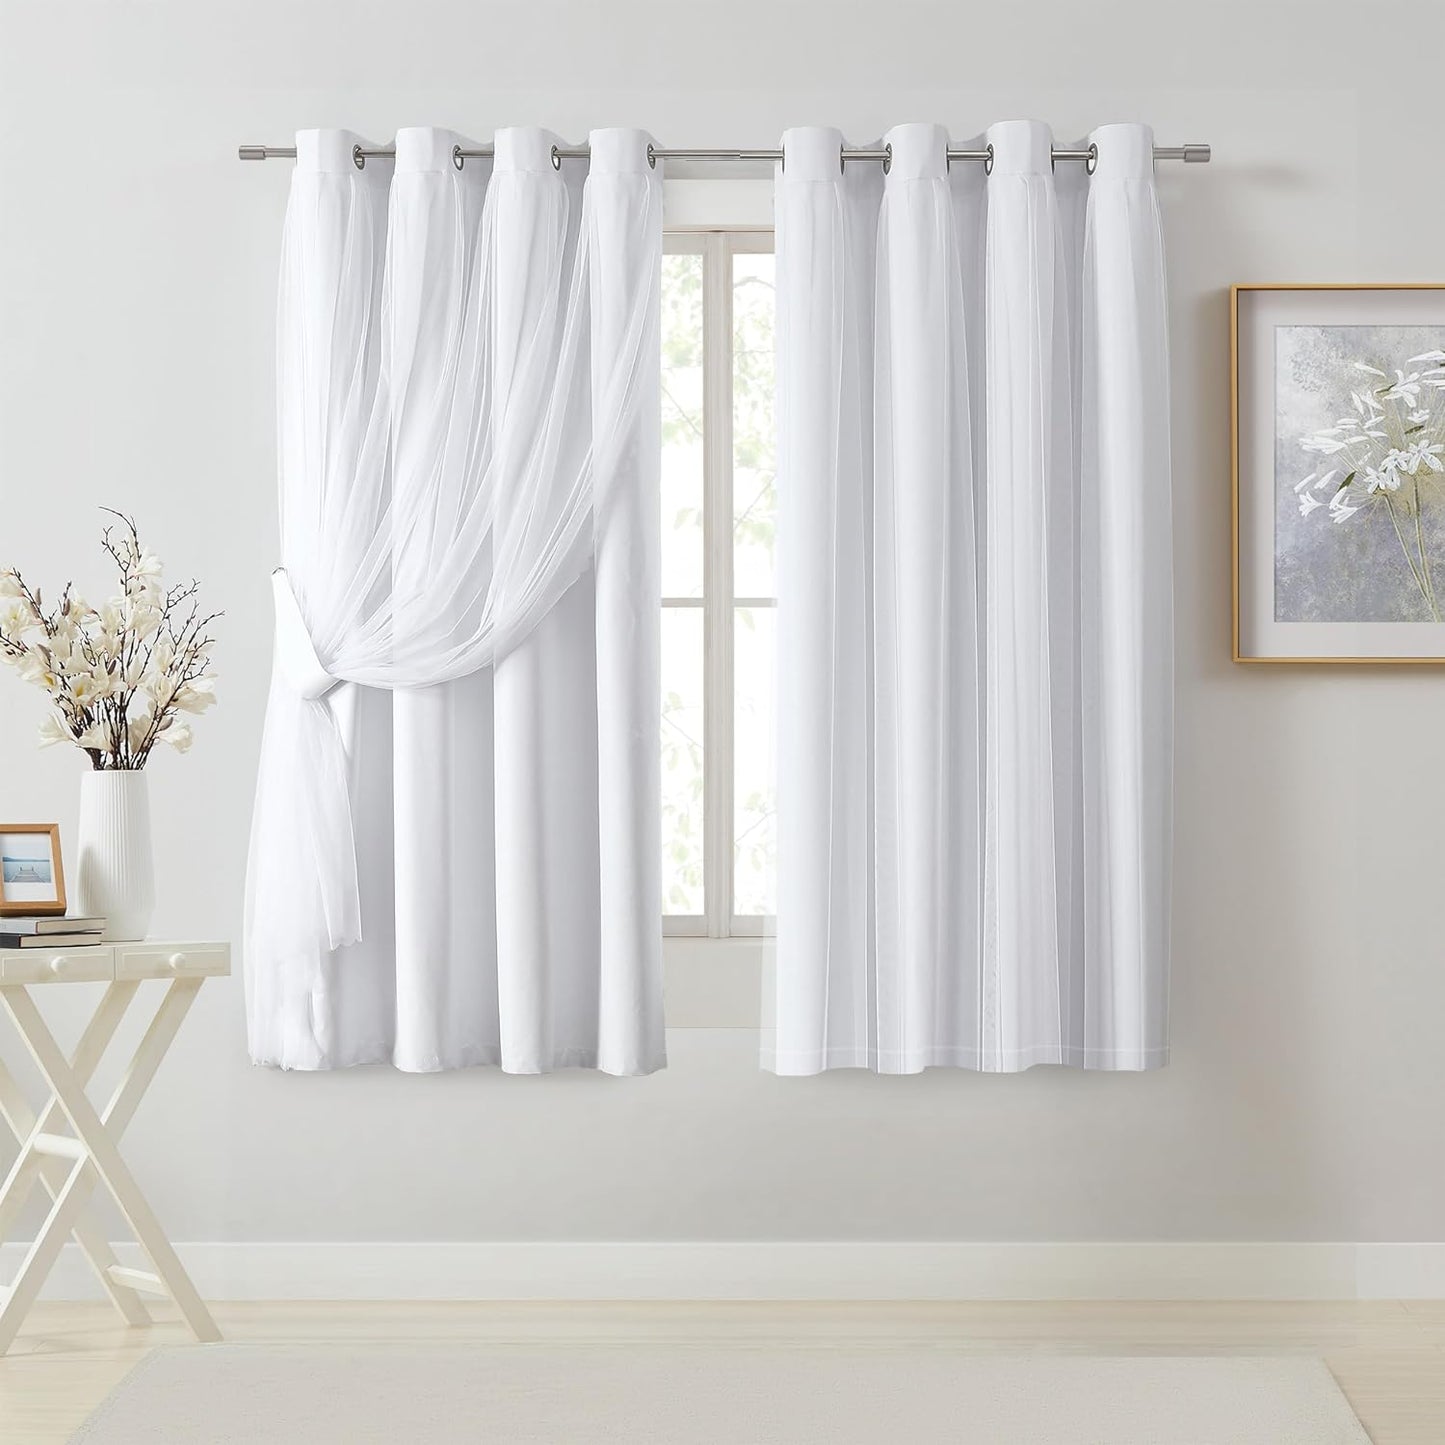 Bujasso Beige 90% Blackout Curtains with Sheer Overlay Mix and Match Double Layer Thermal Insulated Window Panels 84 Inch for Living Room Bedroom Beige Drapes with Tiebacks Grommet Top 37" Wx84 Lx2  Bujasso White 54"Wx63"Lx2 